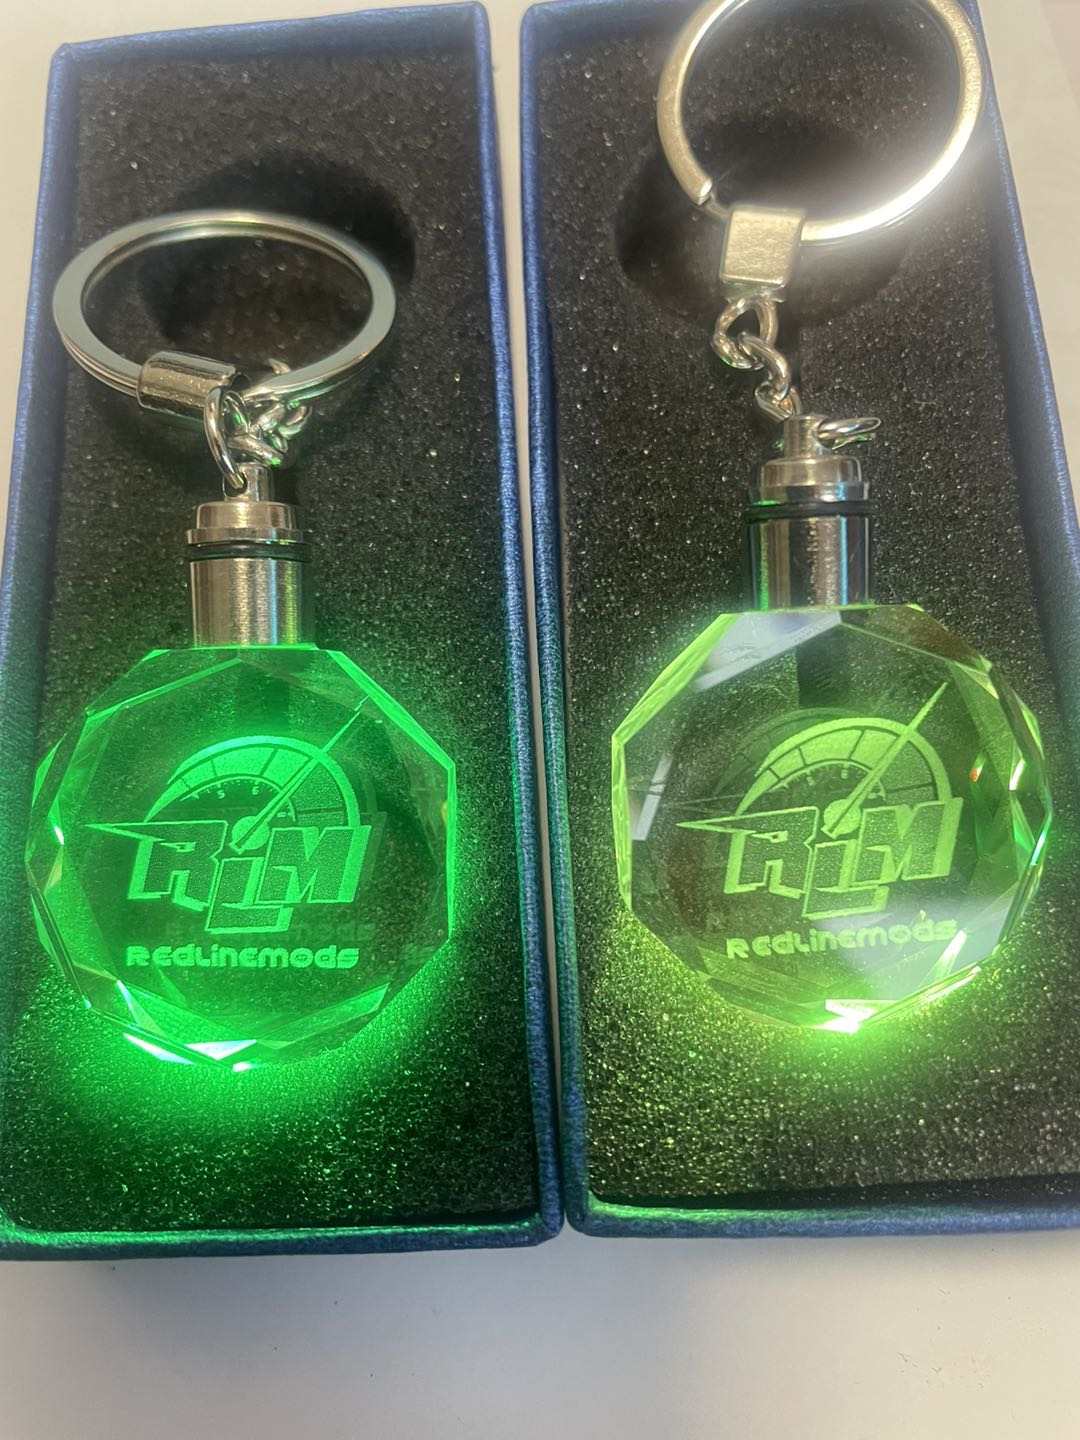 Led Keychain With Changing Colors